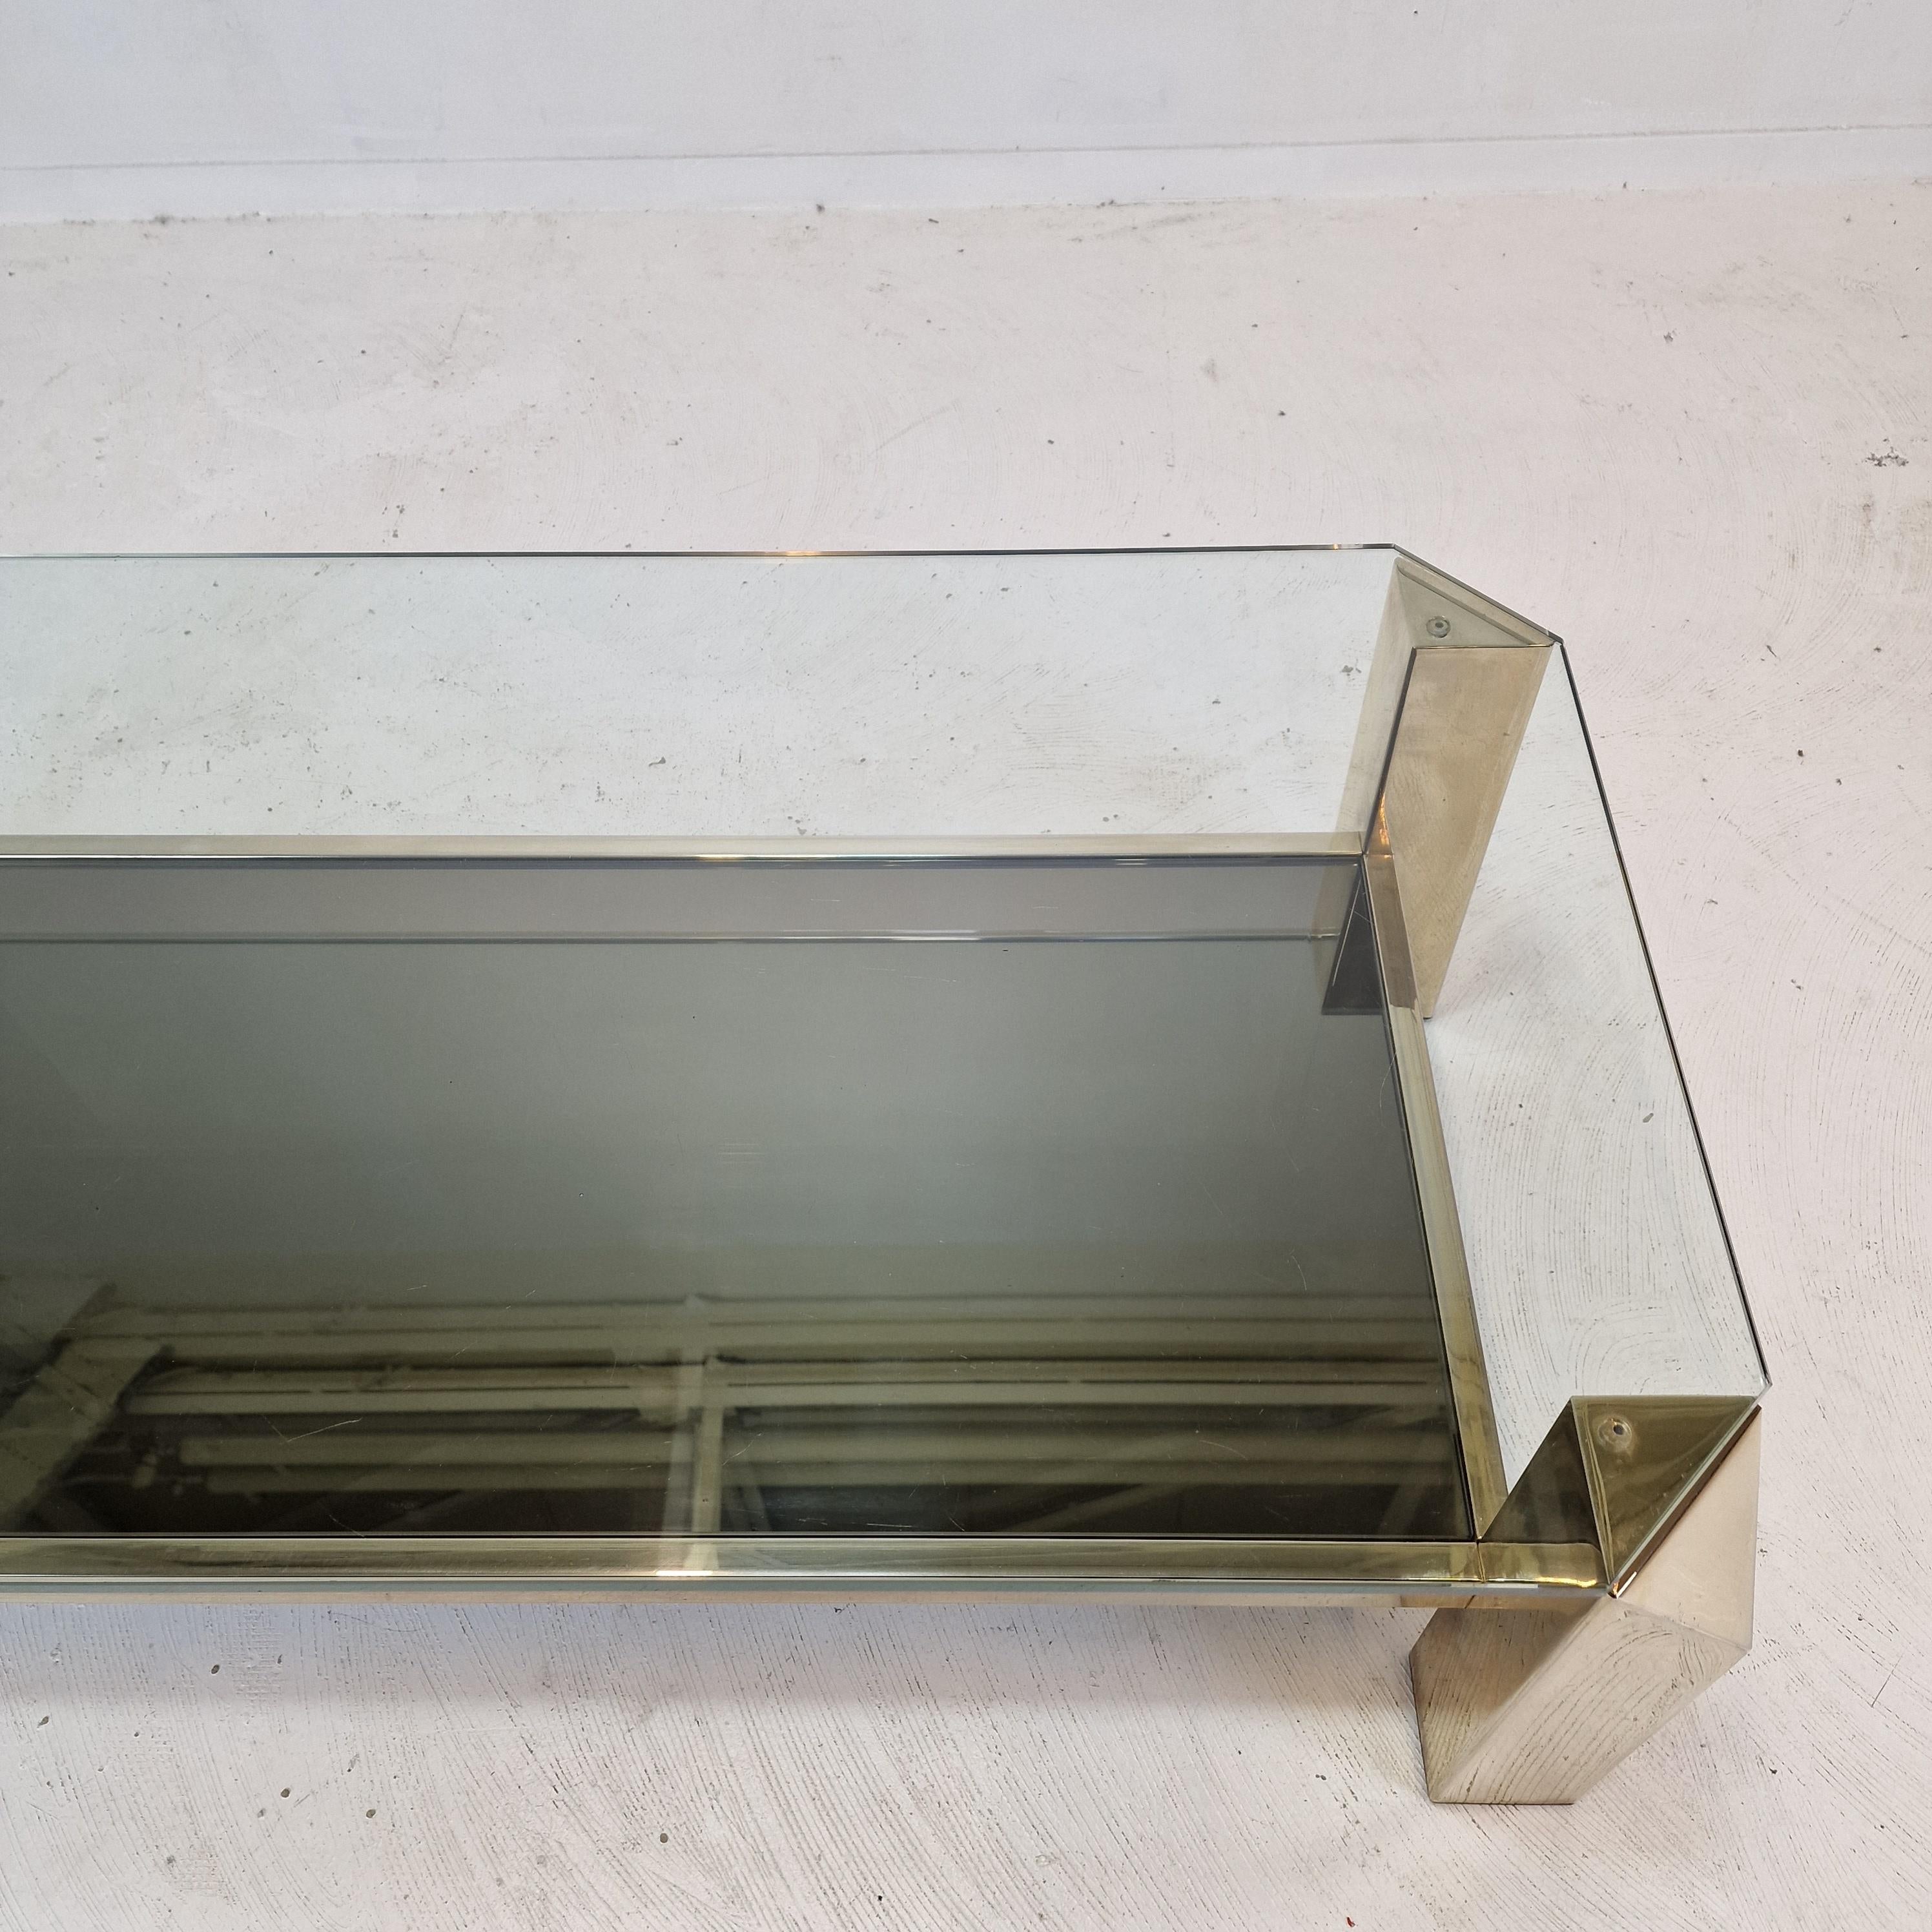 Belgo Chrom Coffee Table 23 Karat Gold Plated, 1970s For Sale 2